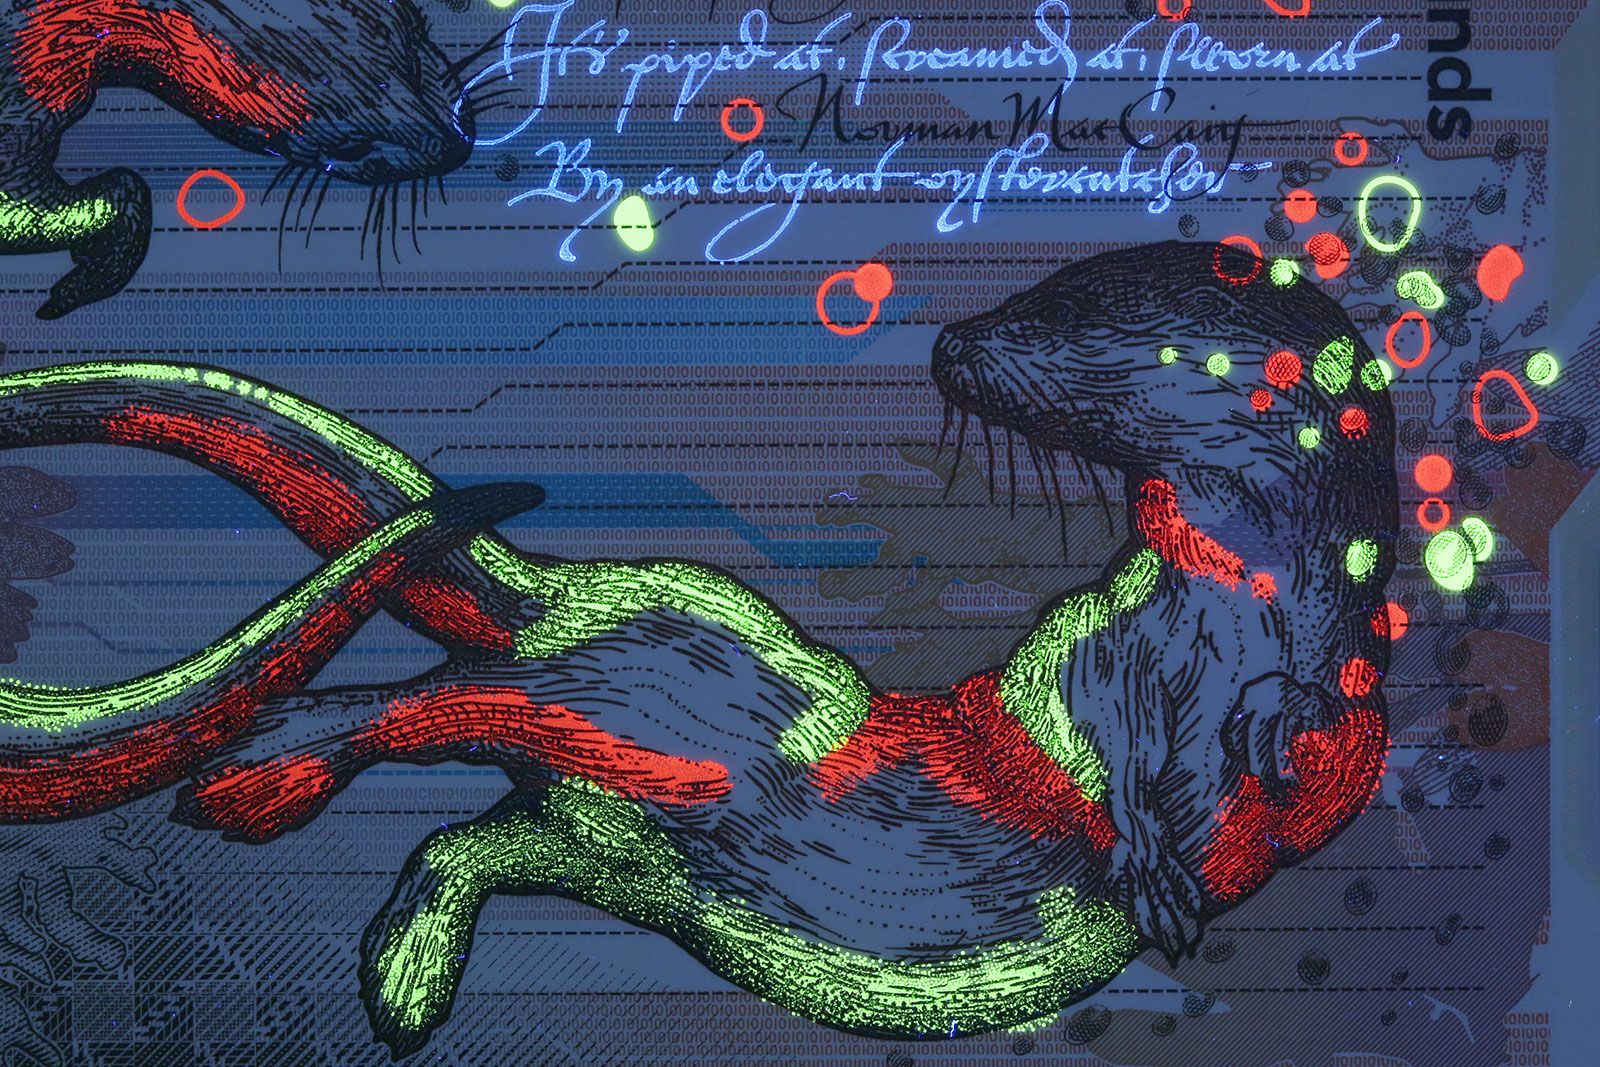 RBS new polymer £10 banknote - closeup image of an otter with UV detailing. Design by O Street, Glasgow.